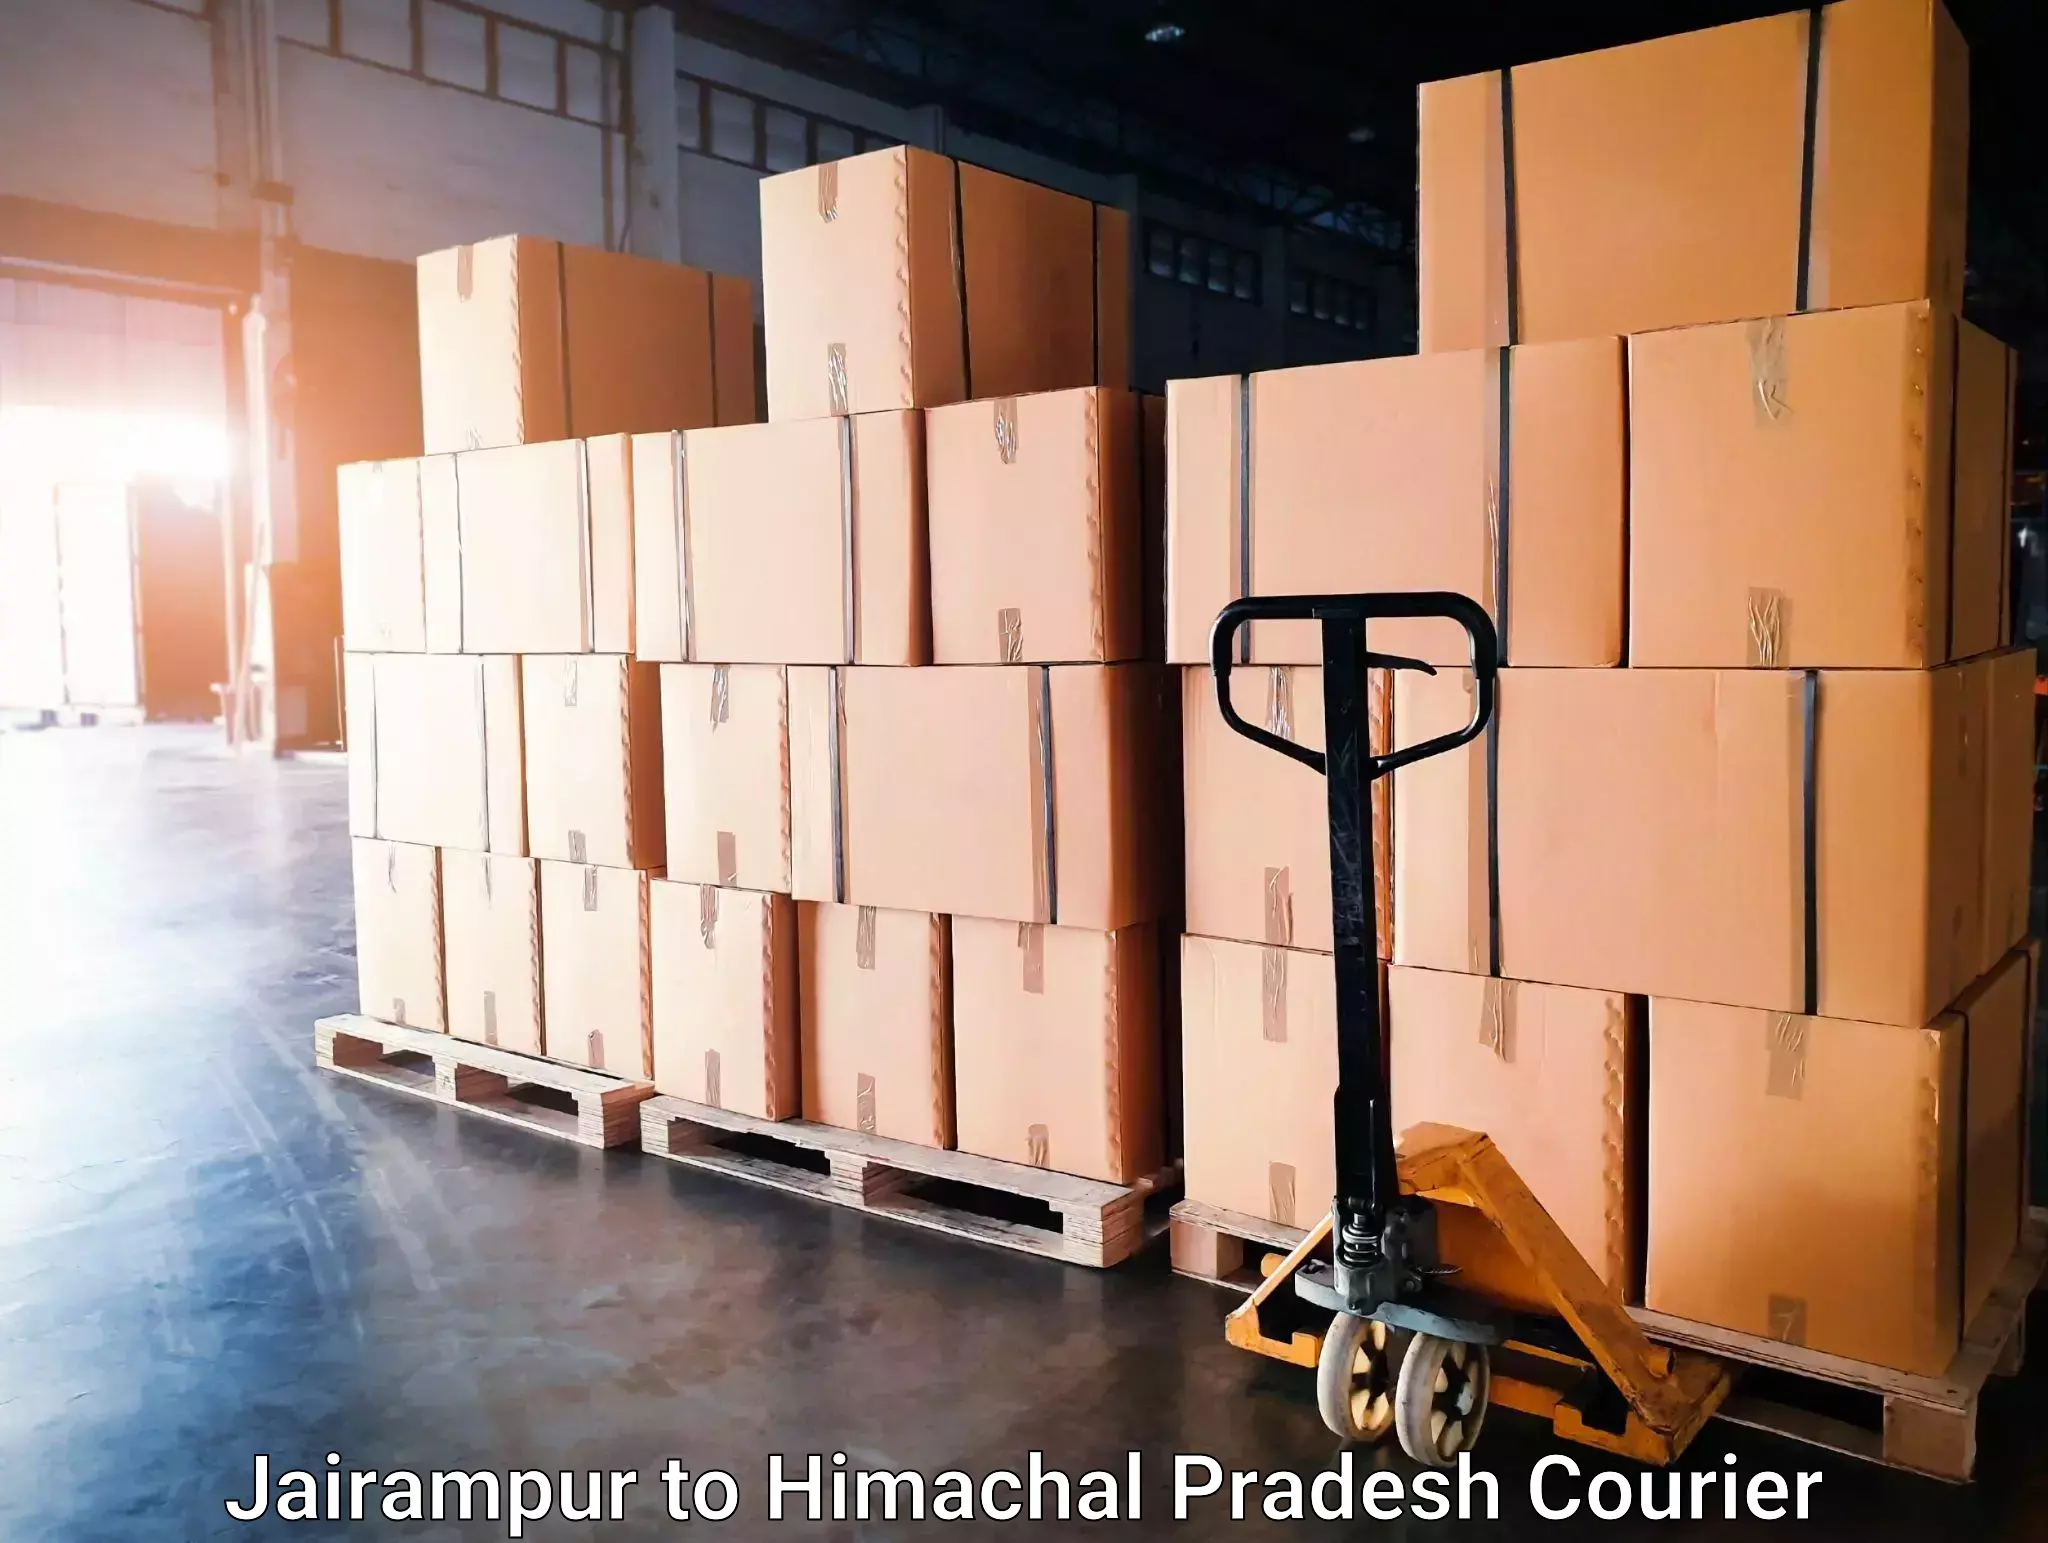 Subscription-based courier Jairampur to YS Parmar University of Horticulture and Forestry Solan